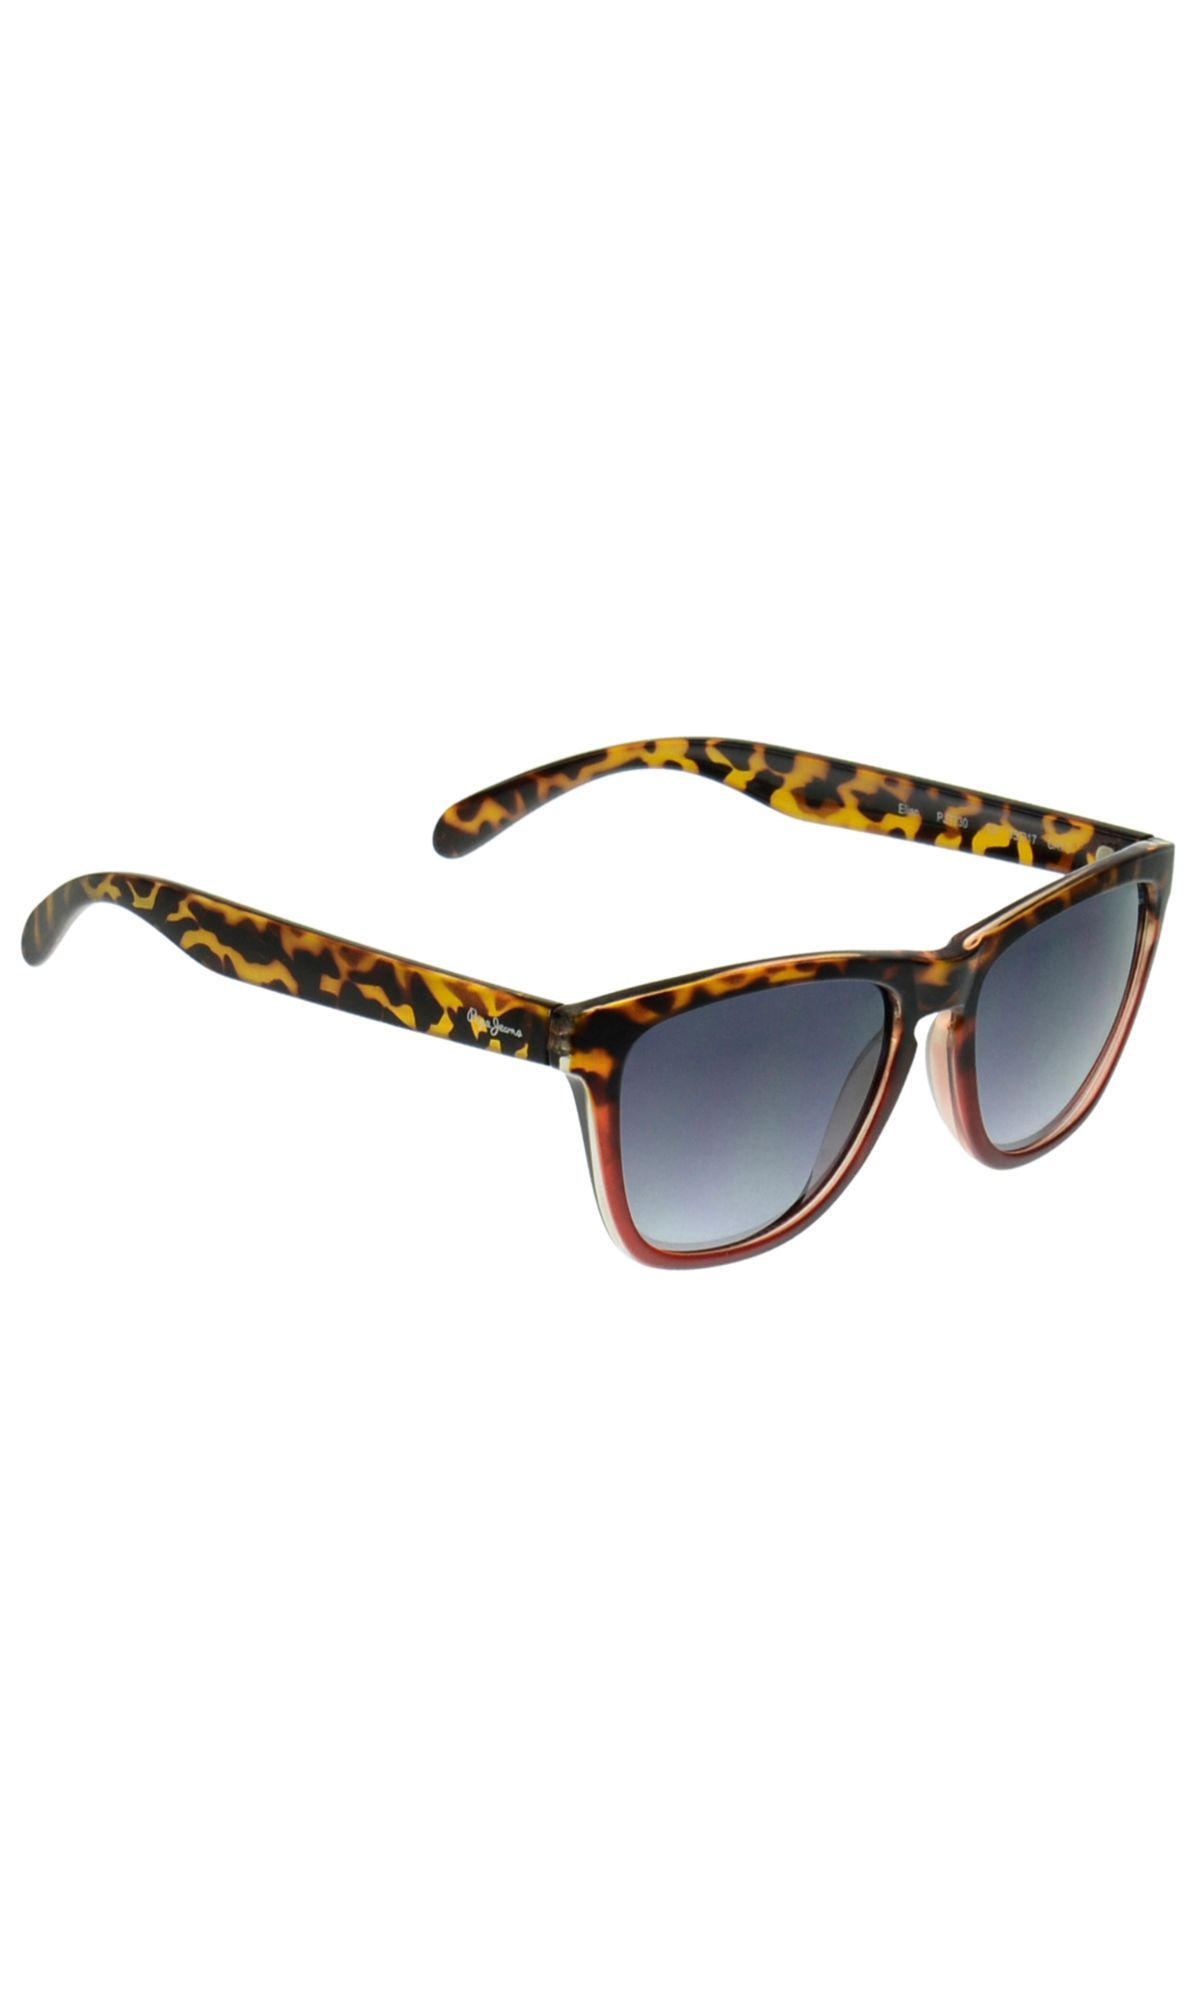 Details more than 150 buy pepe jeans sunglasses super hot